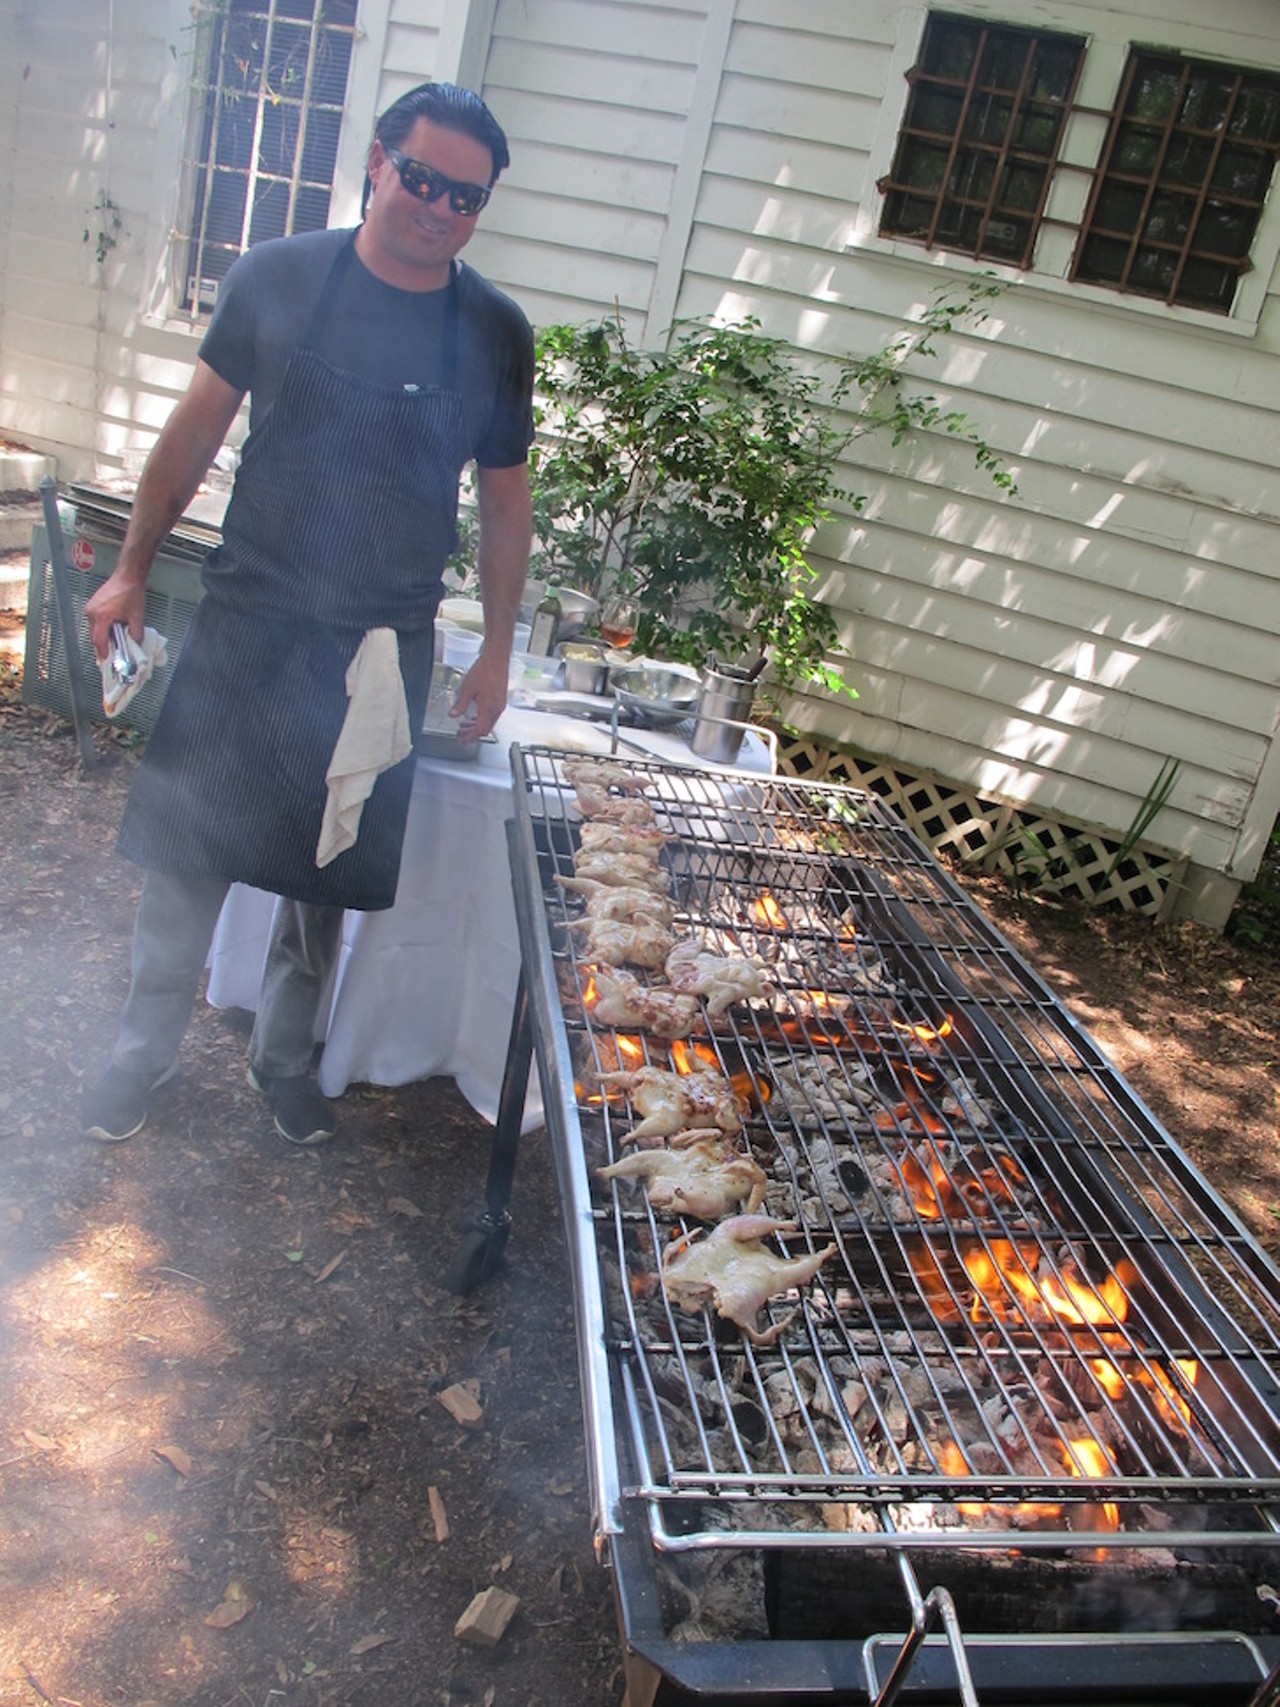 James Petrakis overseeing grilled quail